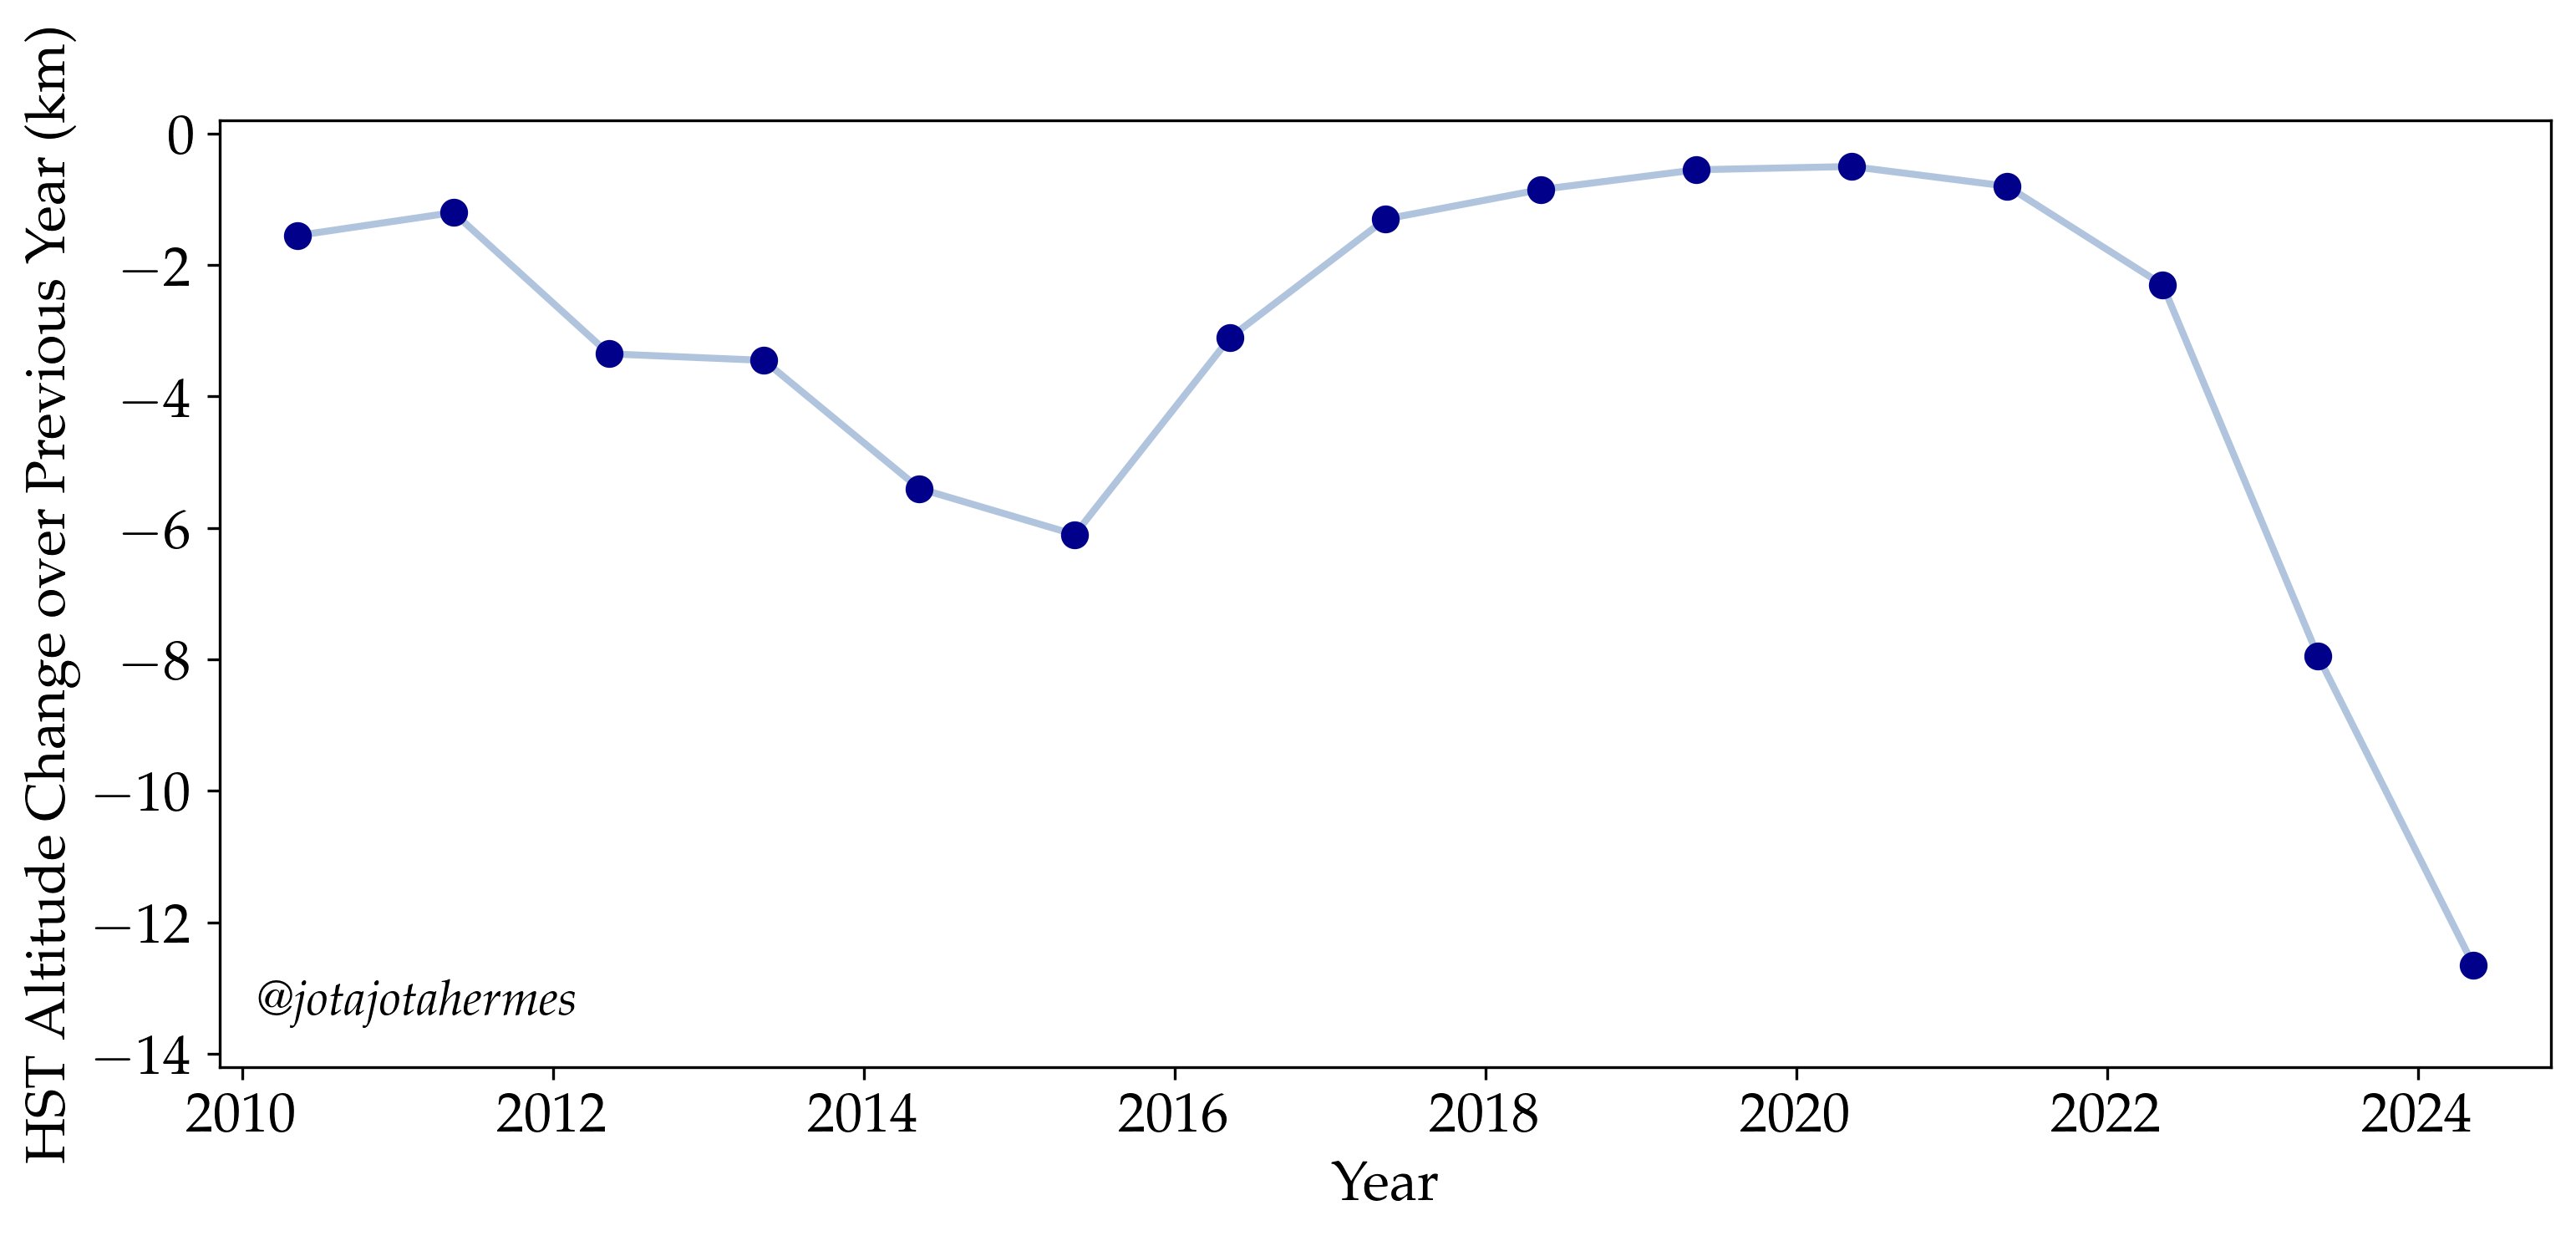 Line graph depicting the Hubble orbit decay from 2010 to 2023, with a significant decrease in altitude beginning in 2020.